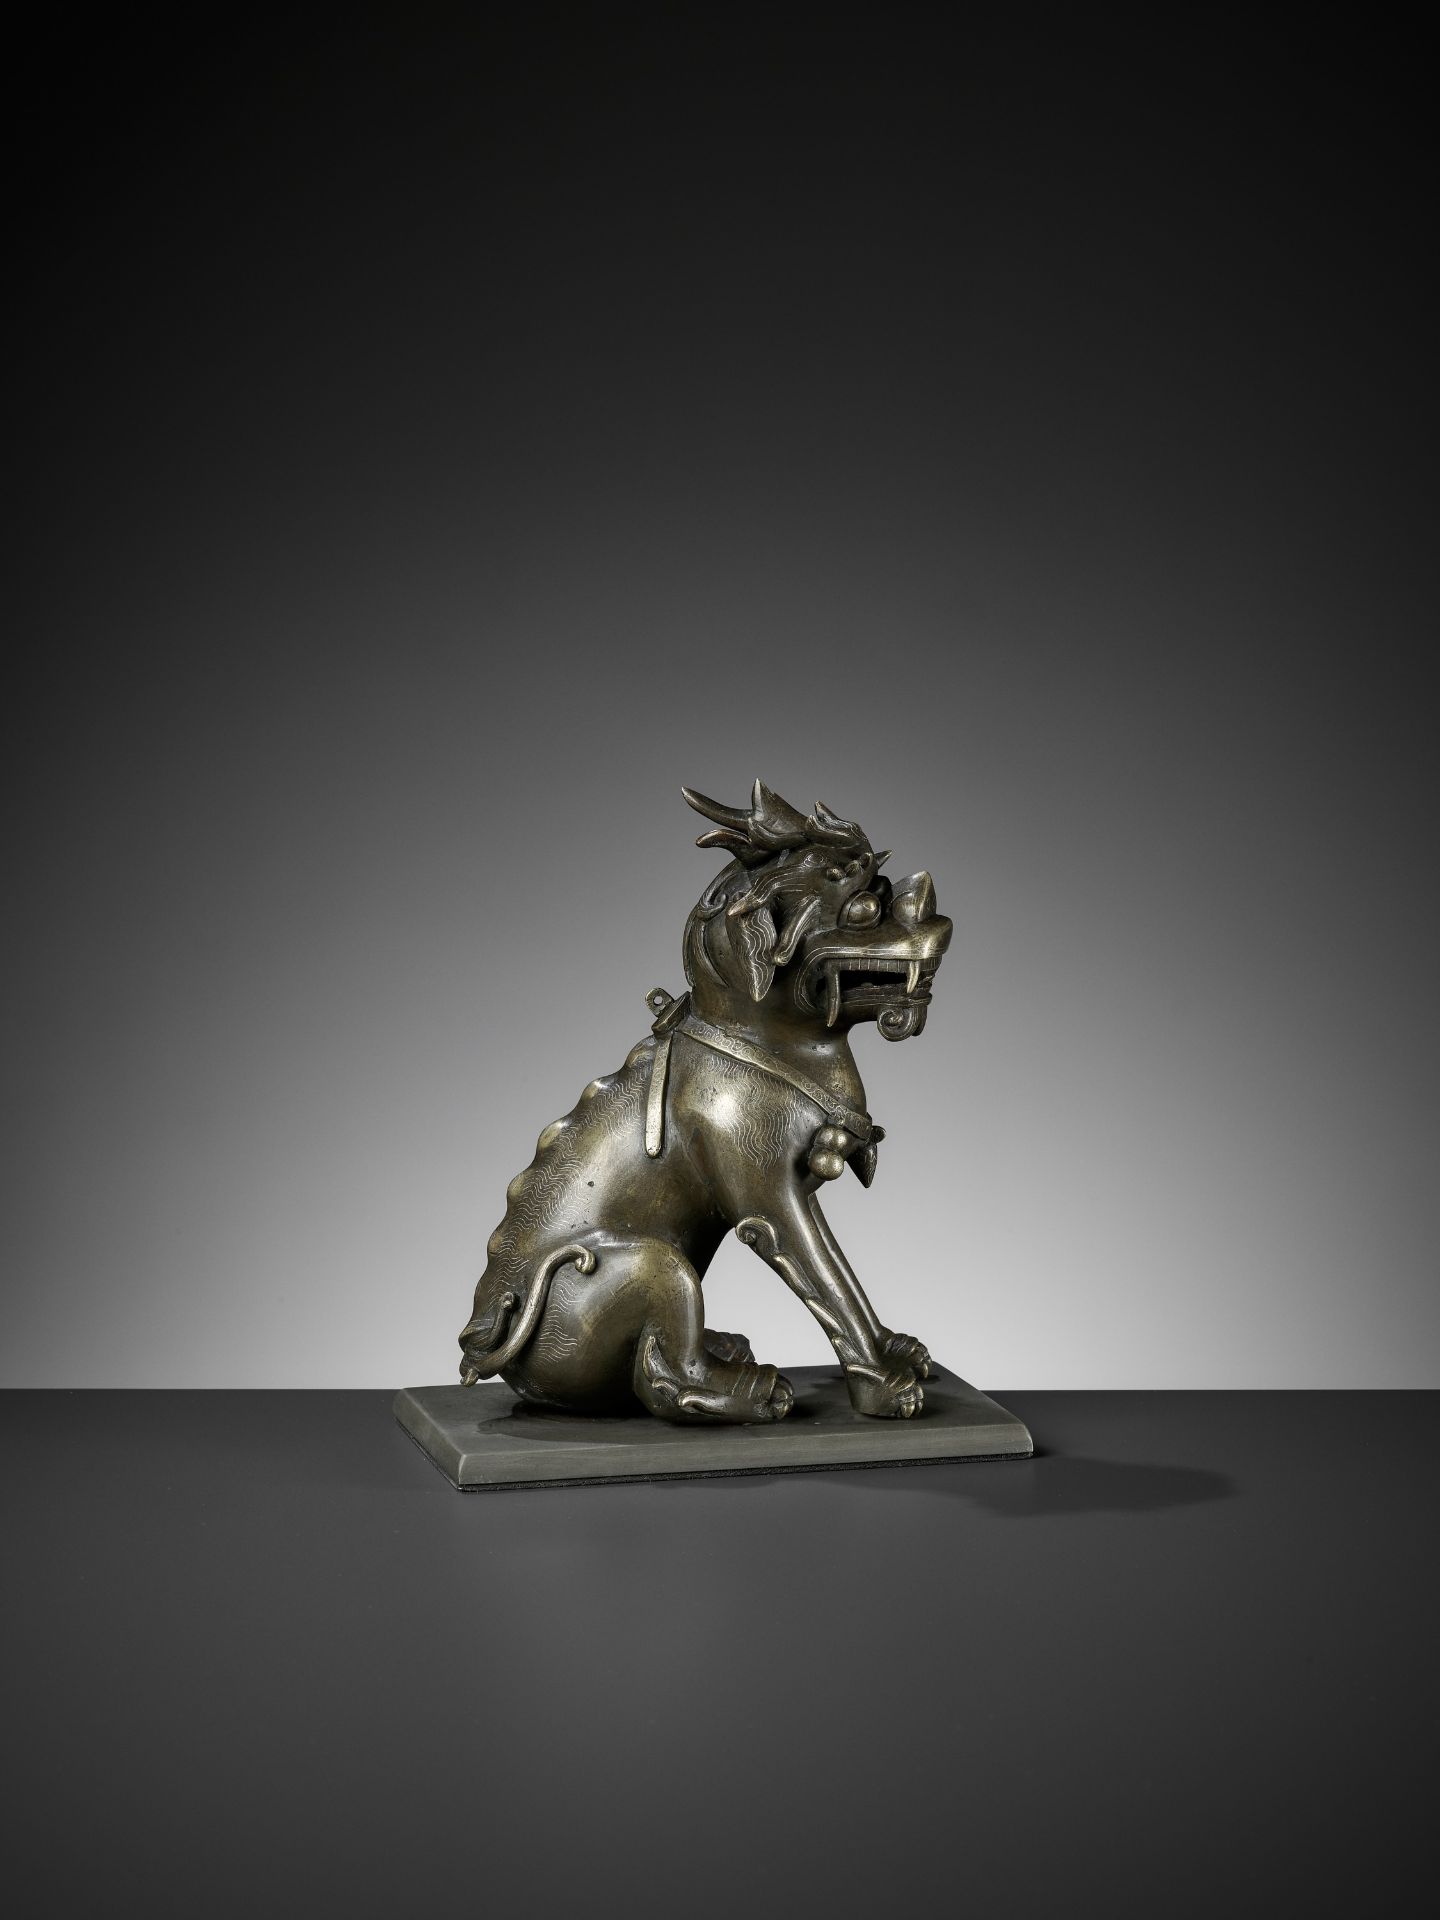 A SILVER WIRE-INLAID BRONZE FIGURE OF A QILIN, ATTRIBUTED TO SHISOU, QING DYNASTY - Image 10 of 12